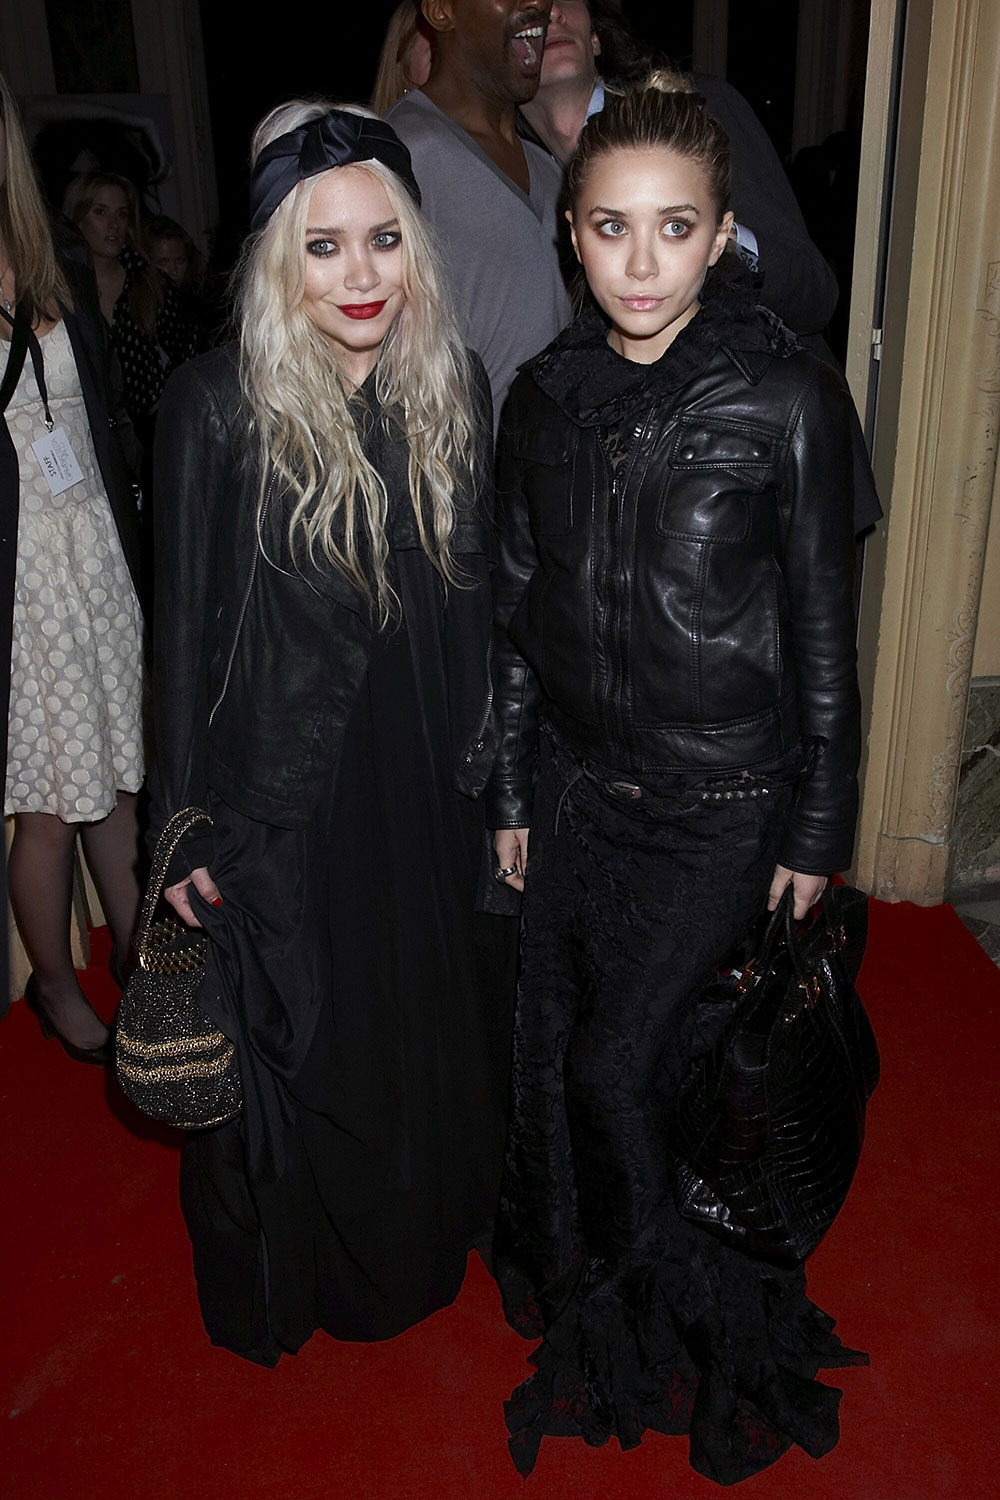 Mary-Kate and Ashley Olsen at the FW07 Giambattista Valli After Party as part of Paris Fashion Week in 2007